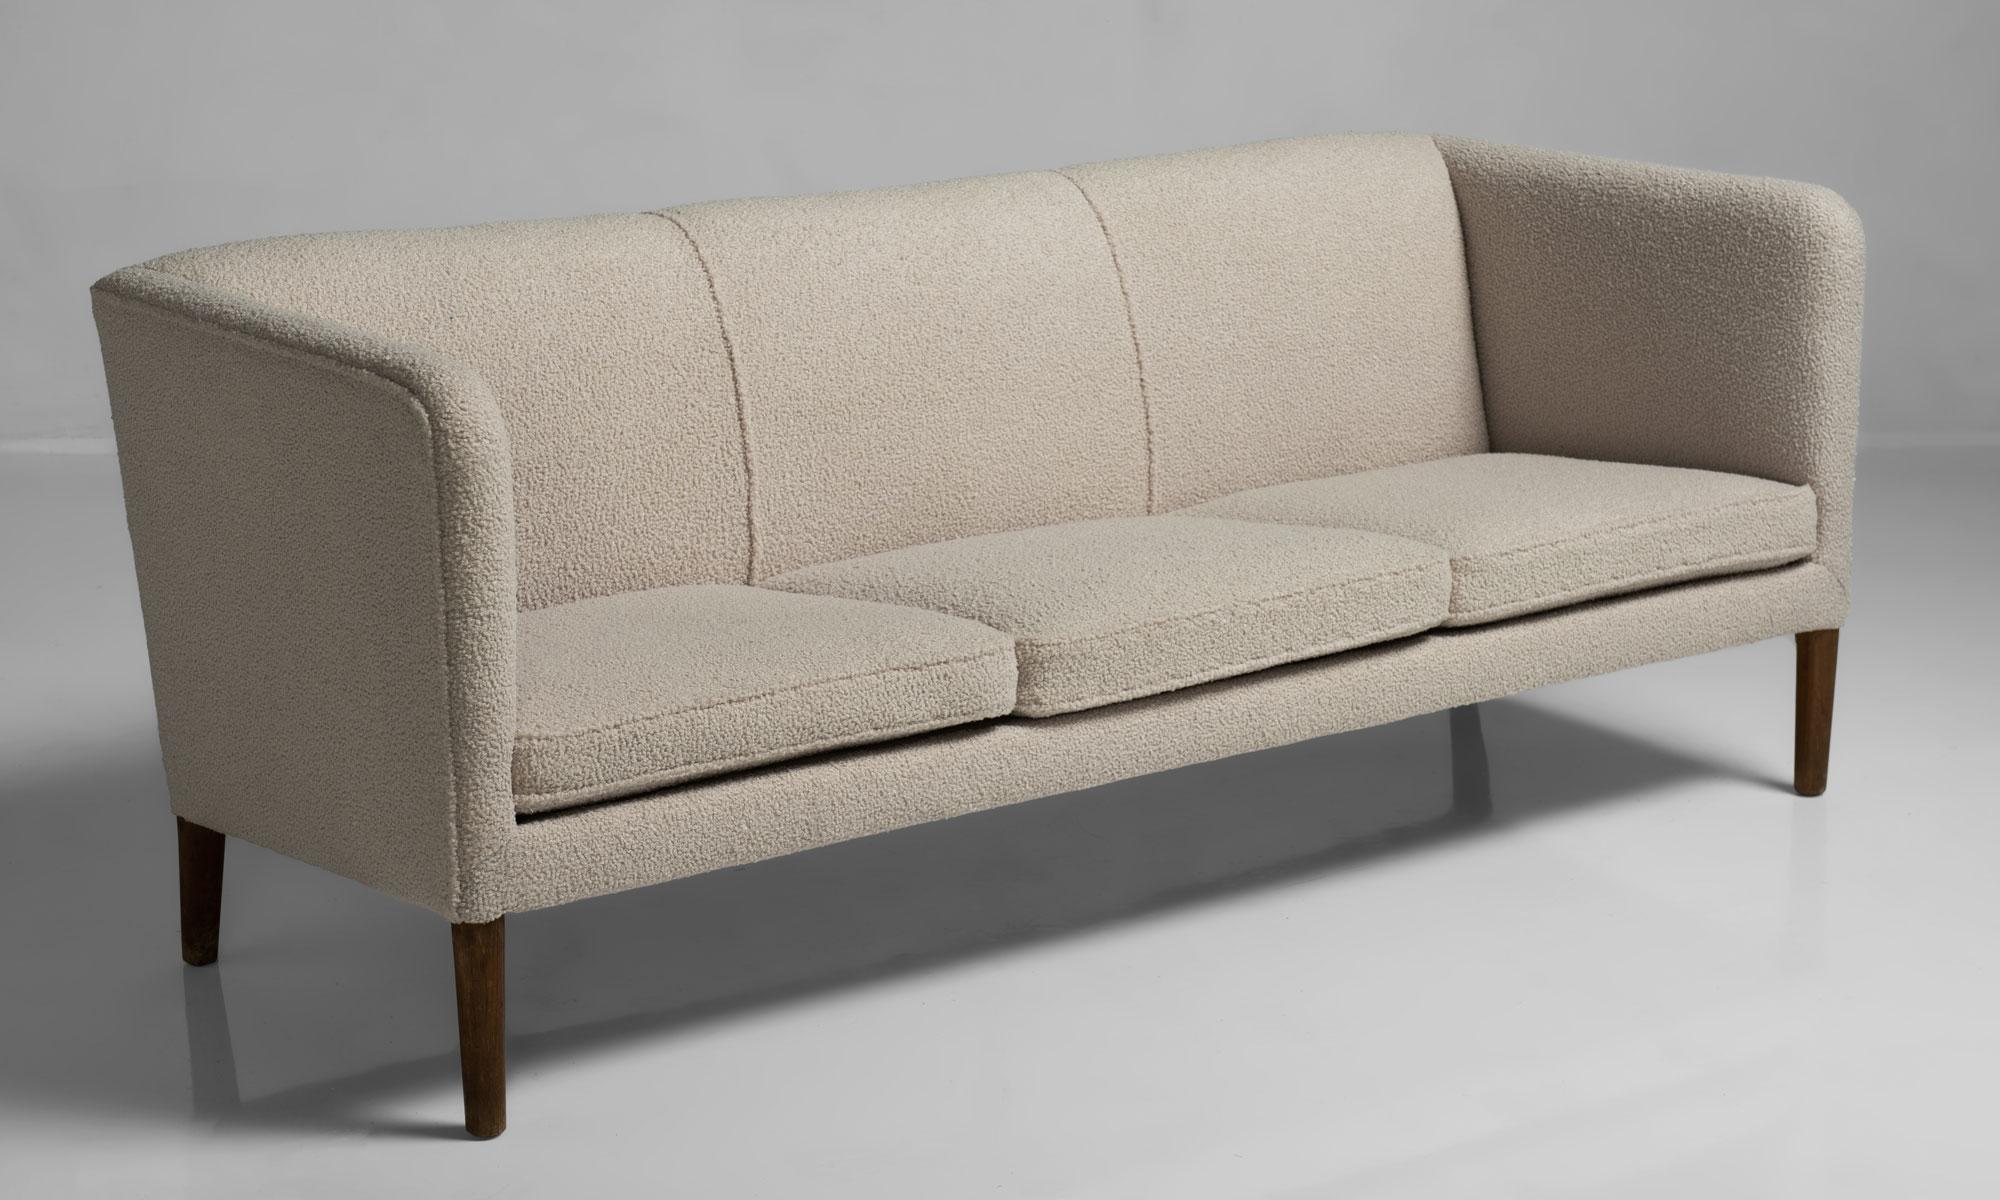 AP-18S sofa by Hans J. Wegner, Denmark, circa 1950.

Three-seat sofa newly upholstered in beige wool on solid oak legs. Manufactured by AP Stolen.